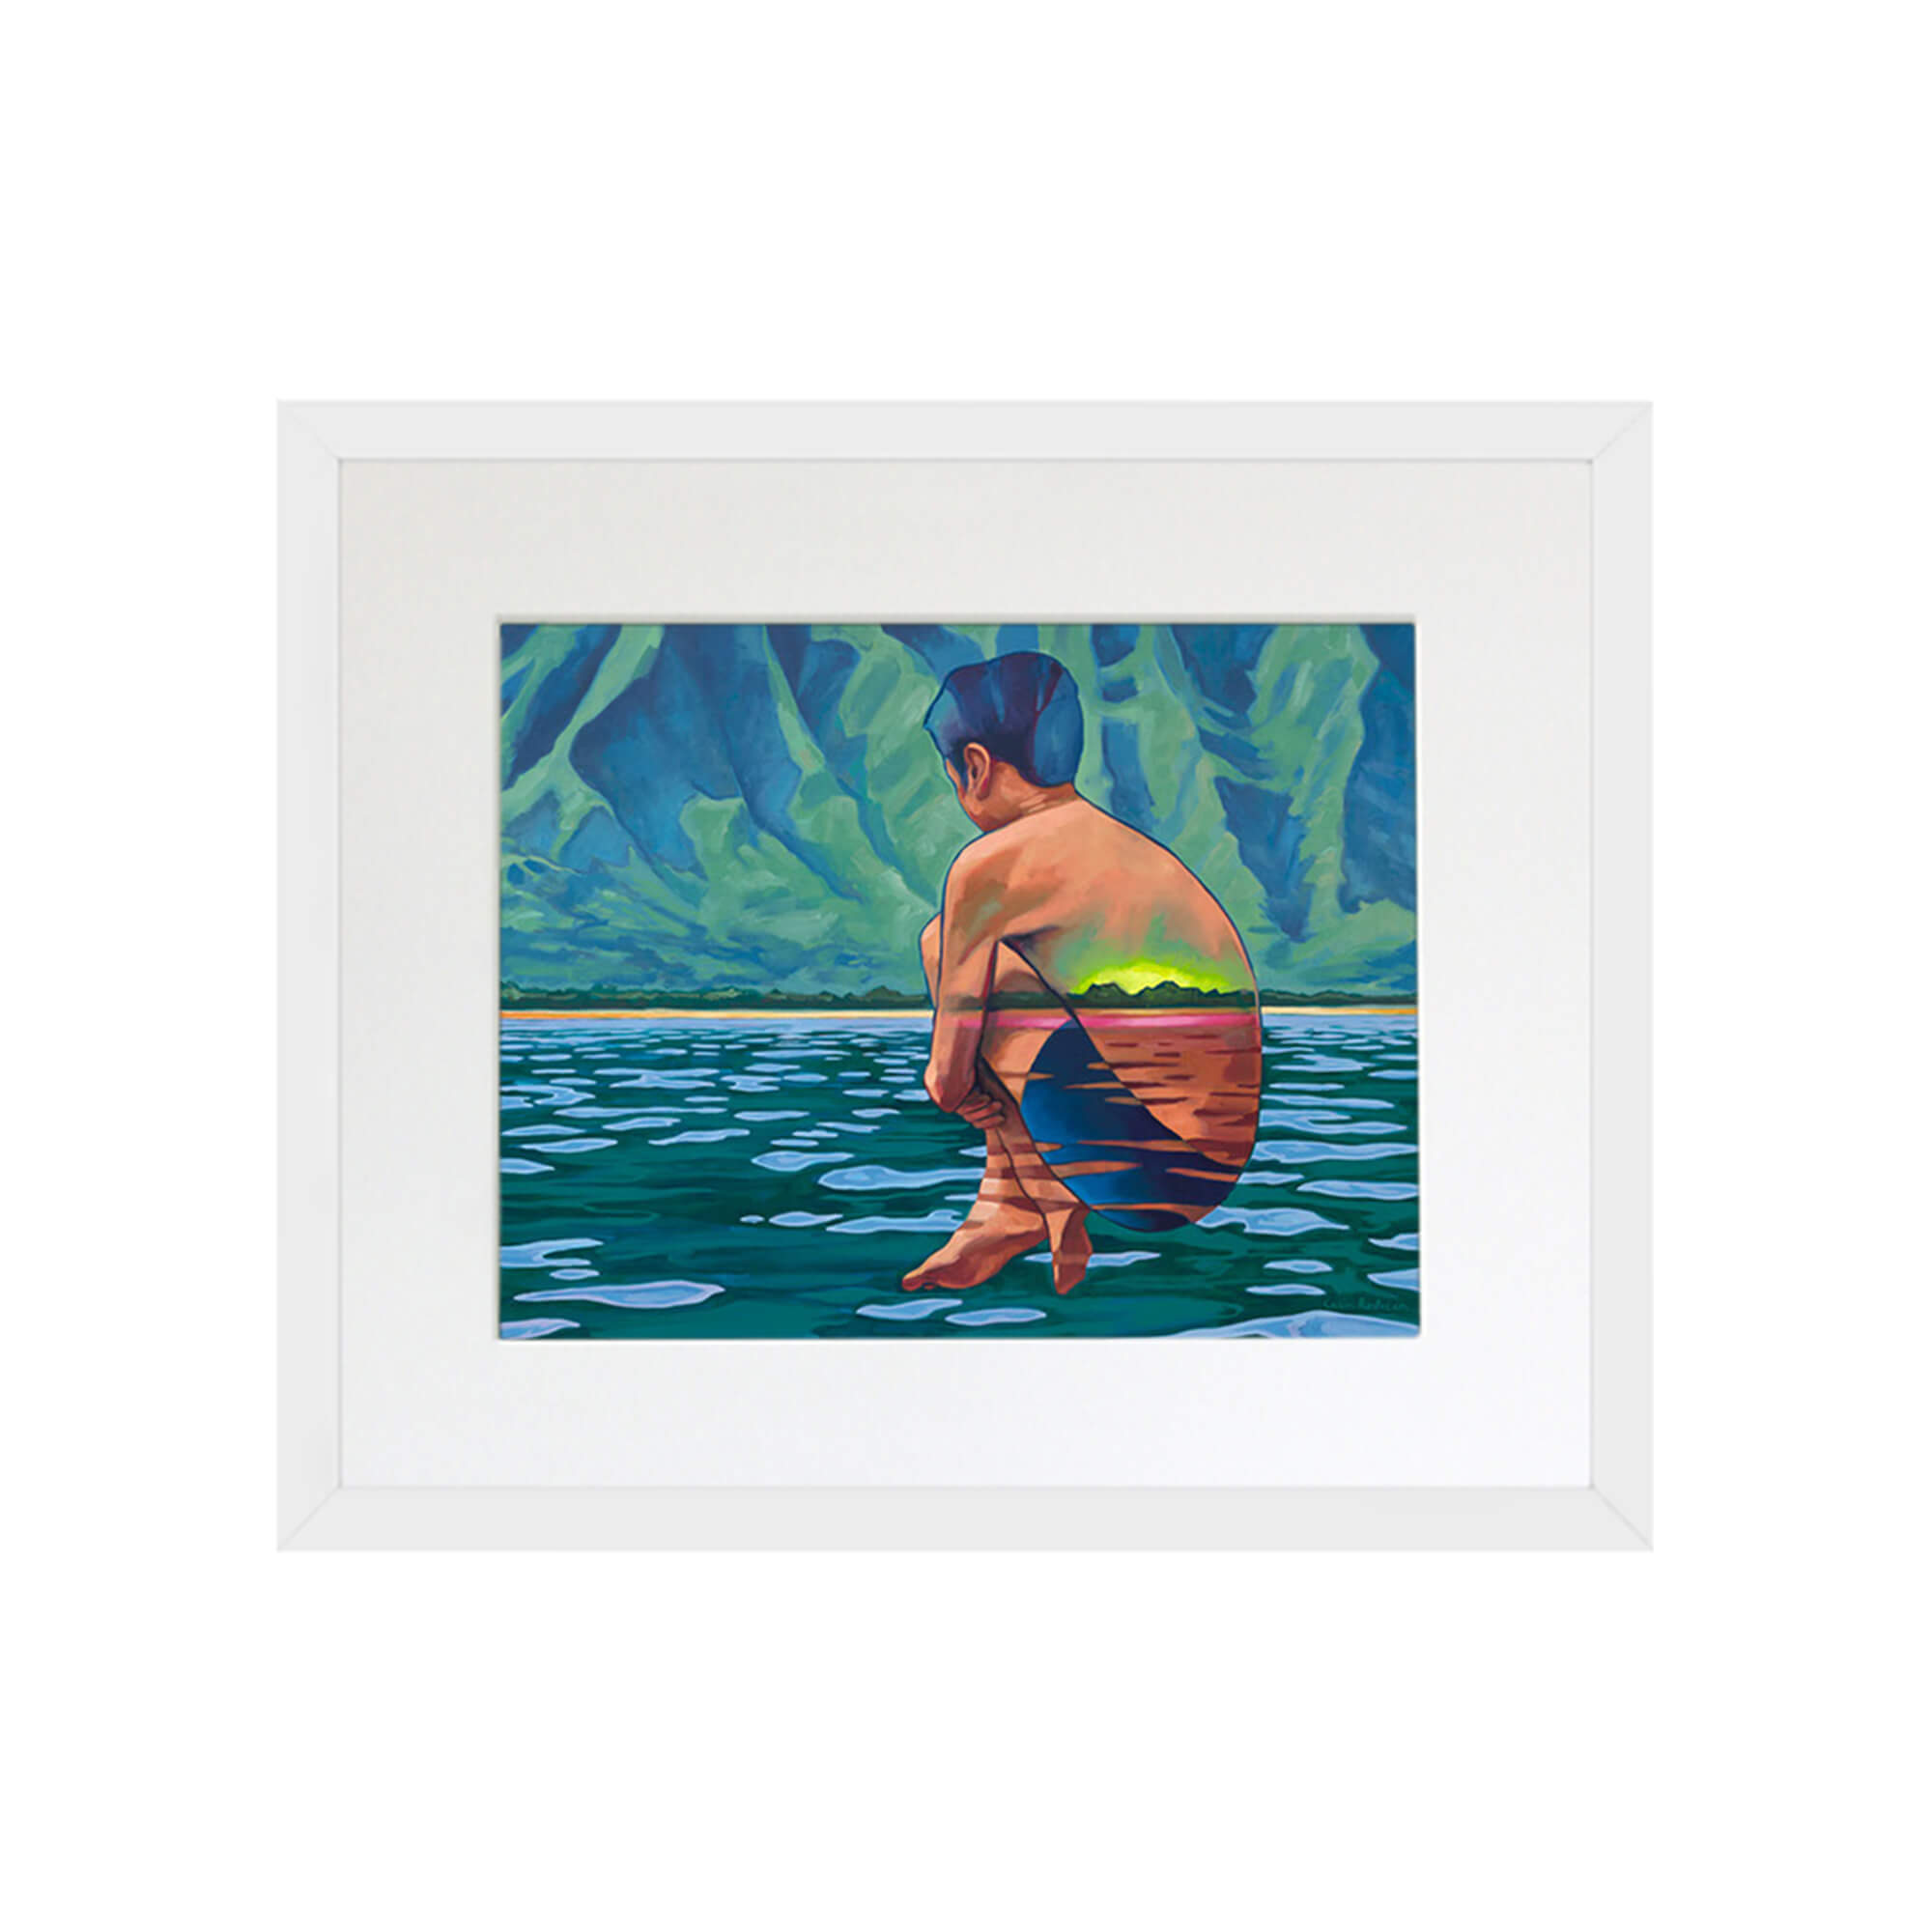 A boy and a tropical island by Hawaii artist Colin Redican